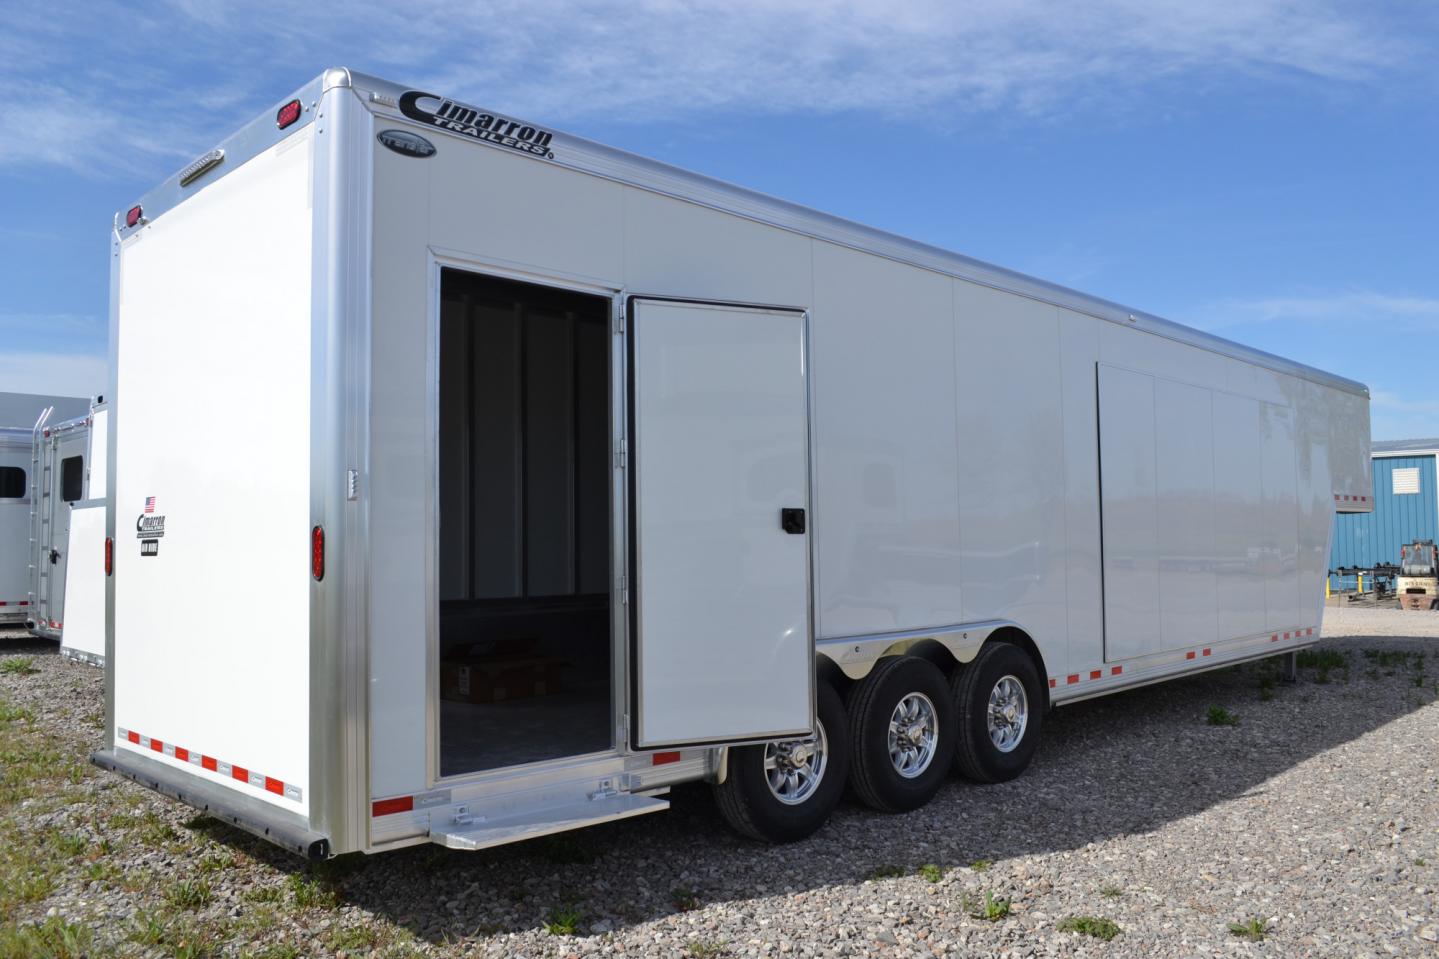 Transtar 32′ x 8′ “Headquarters” with Double Slide-Outs #11527